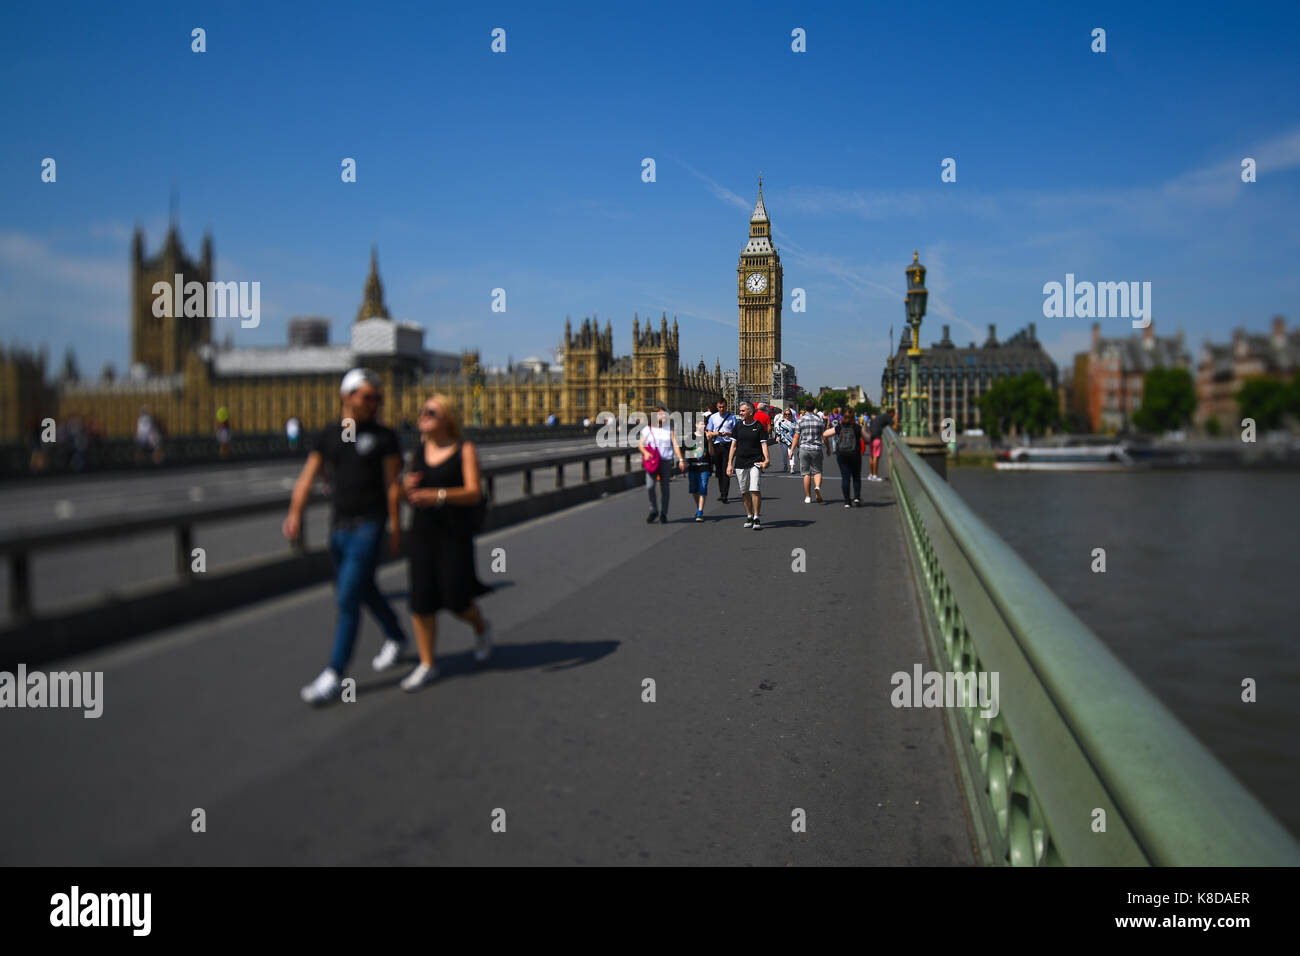 Anti Terroisim barrier installed on Westminister bridge to protect pedestrians walking to the Houses of Parliament and Big Ben and Elizabeth Tower Stock Photo